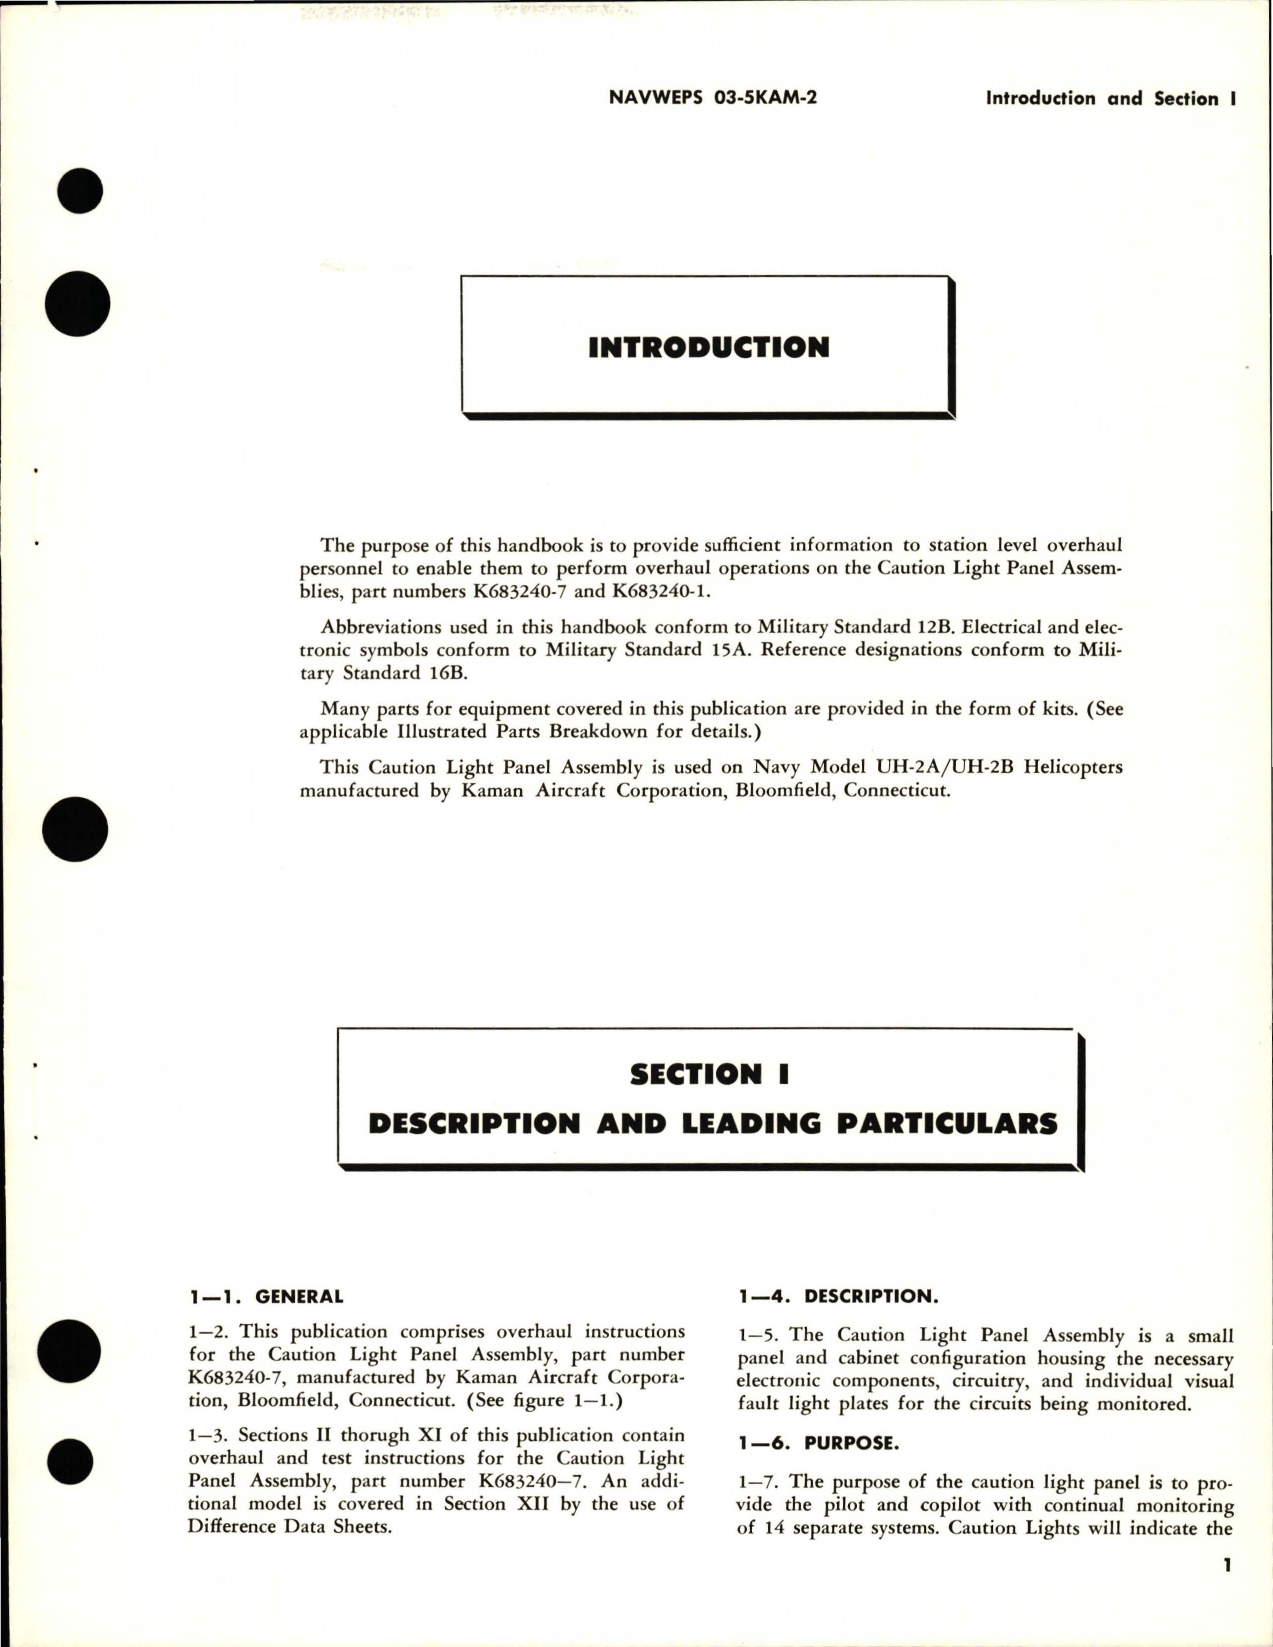 Sample page 5 from AirCorps Library document: Overhaul Instructions for Caution Light Panel Assembly - Parts K683240-1 and K683240-7